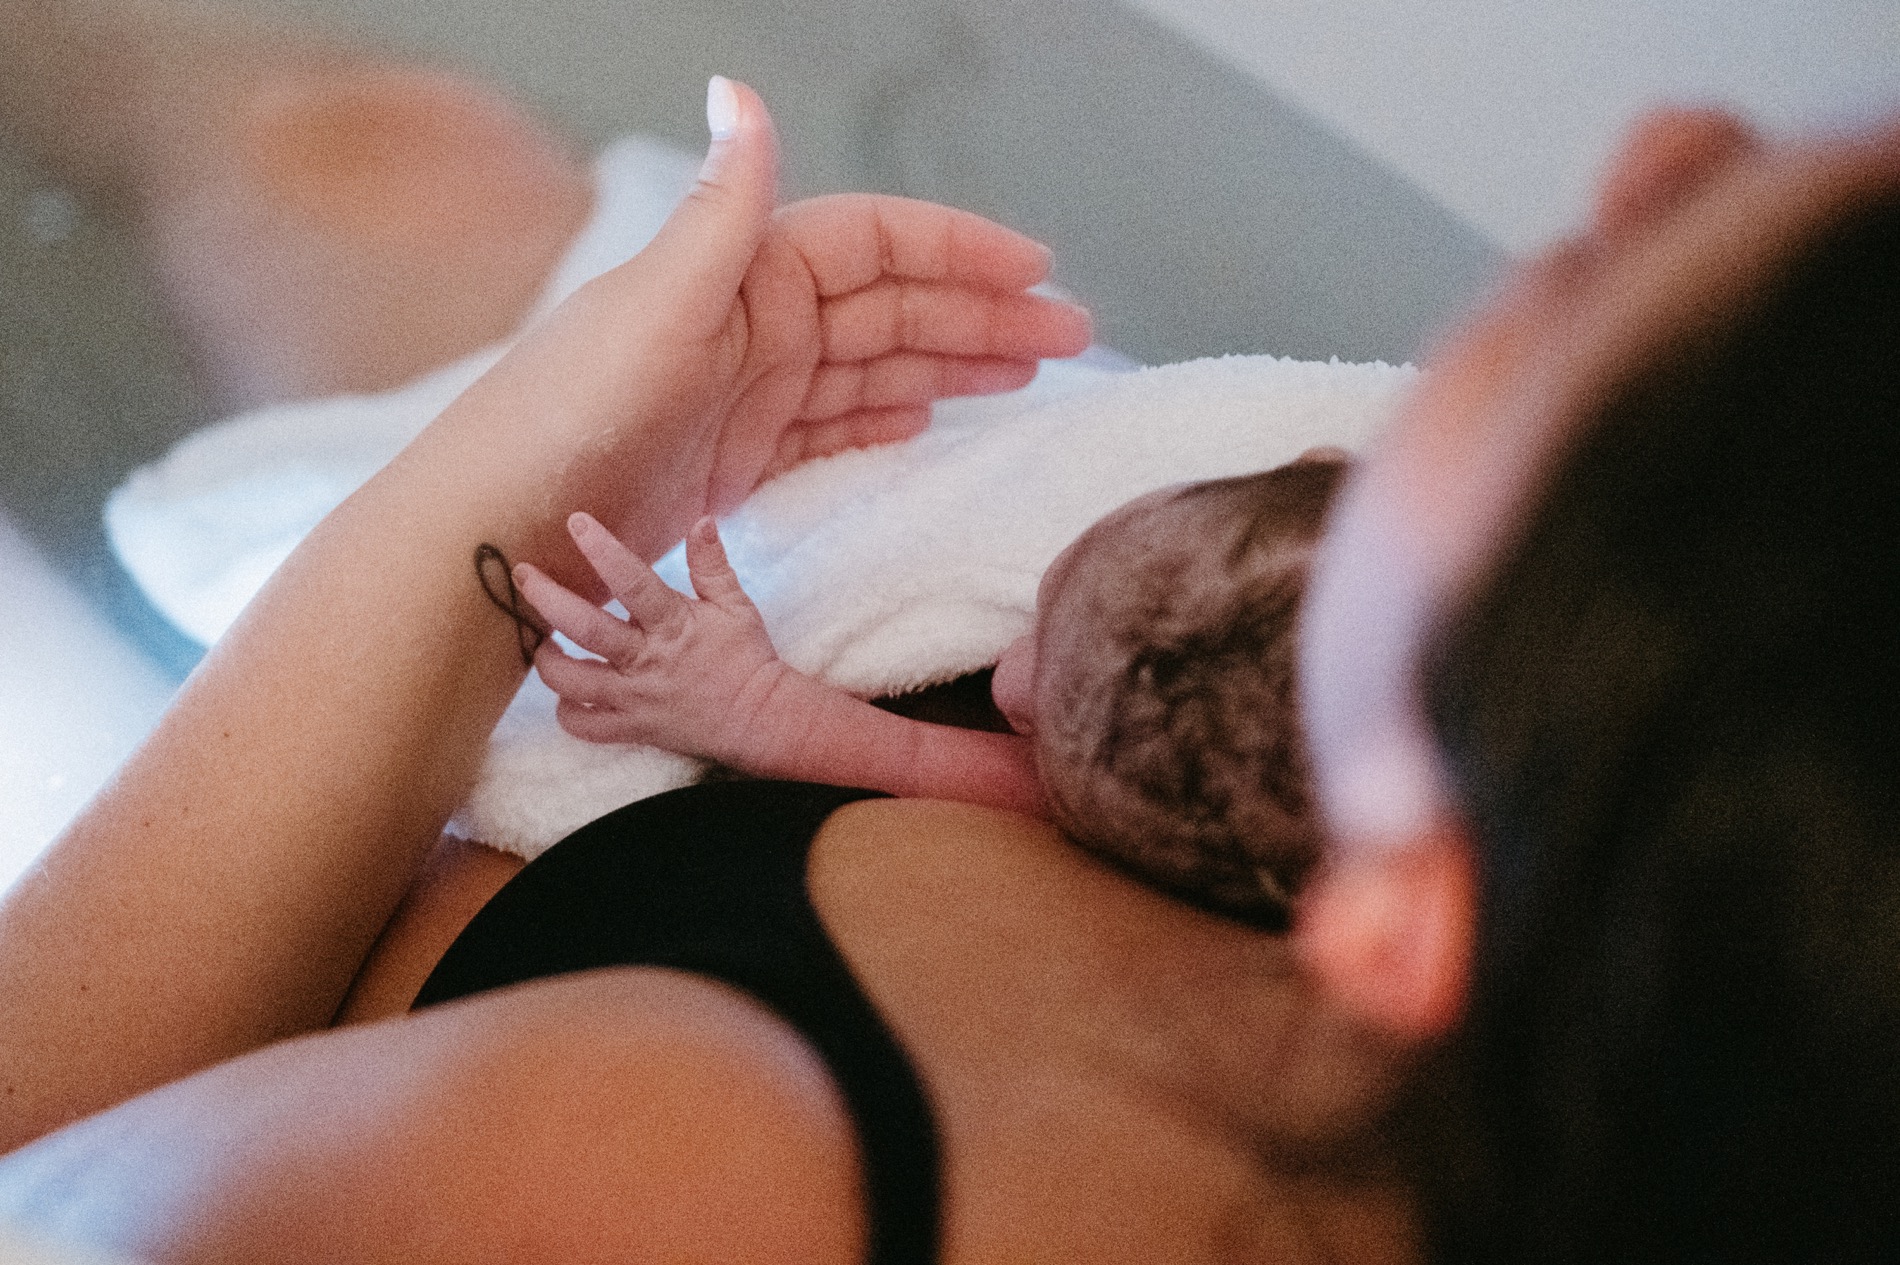 A mother and a newborn baby in a tub, hands touching